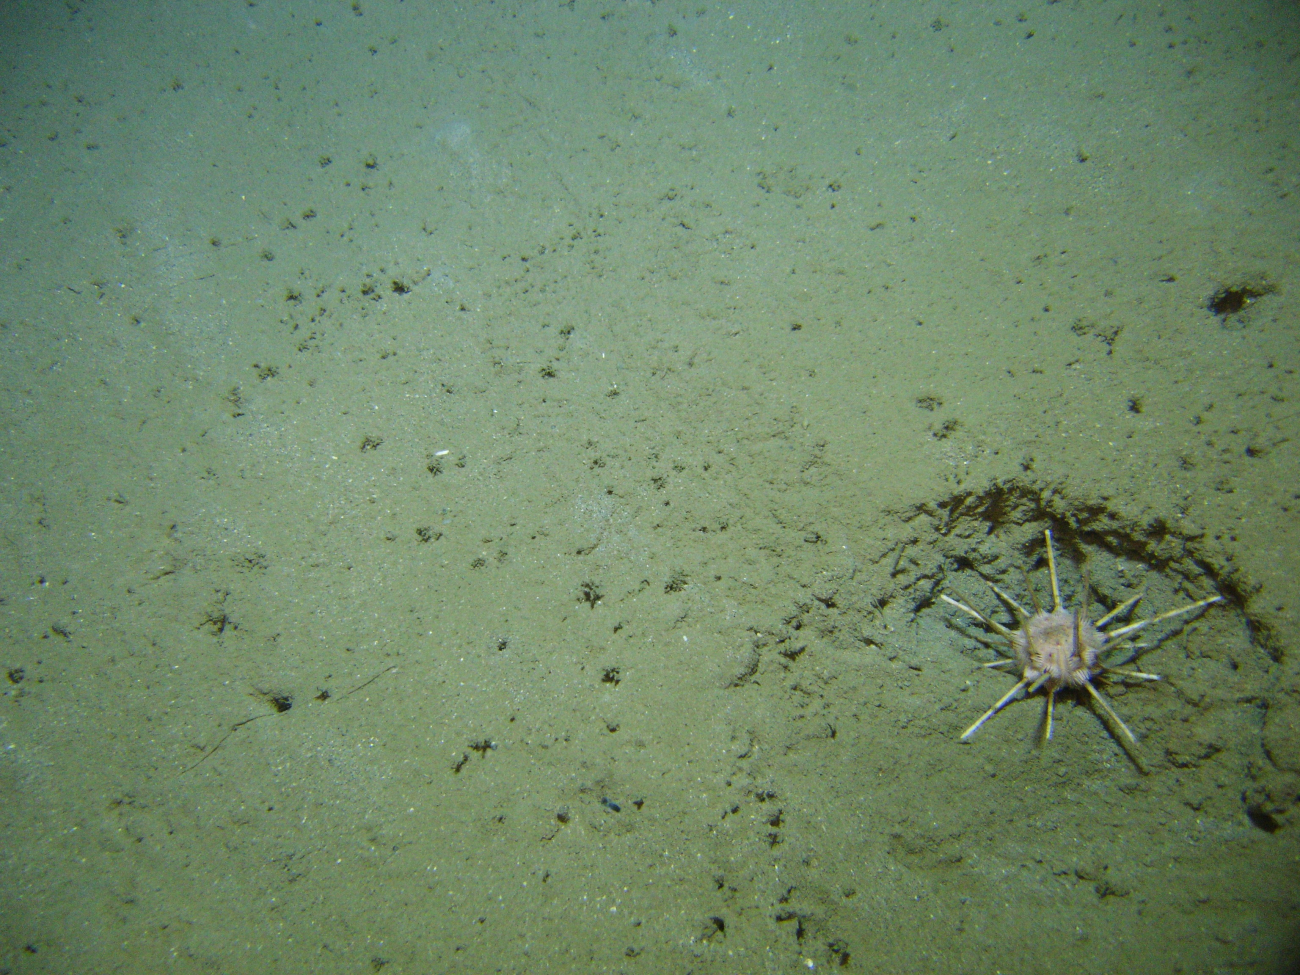 A pencil urchin in a depression on the seafloor